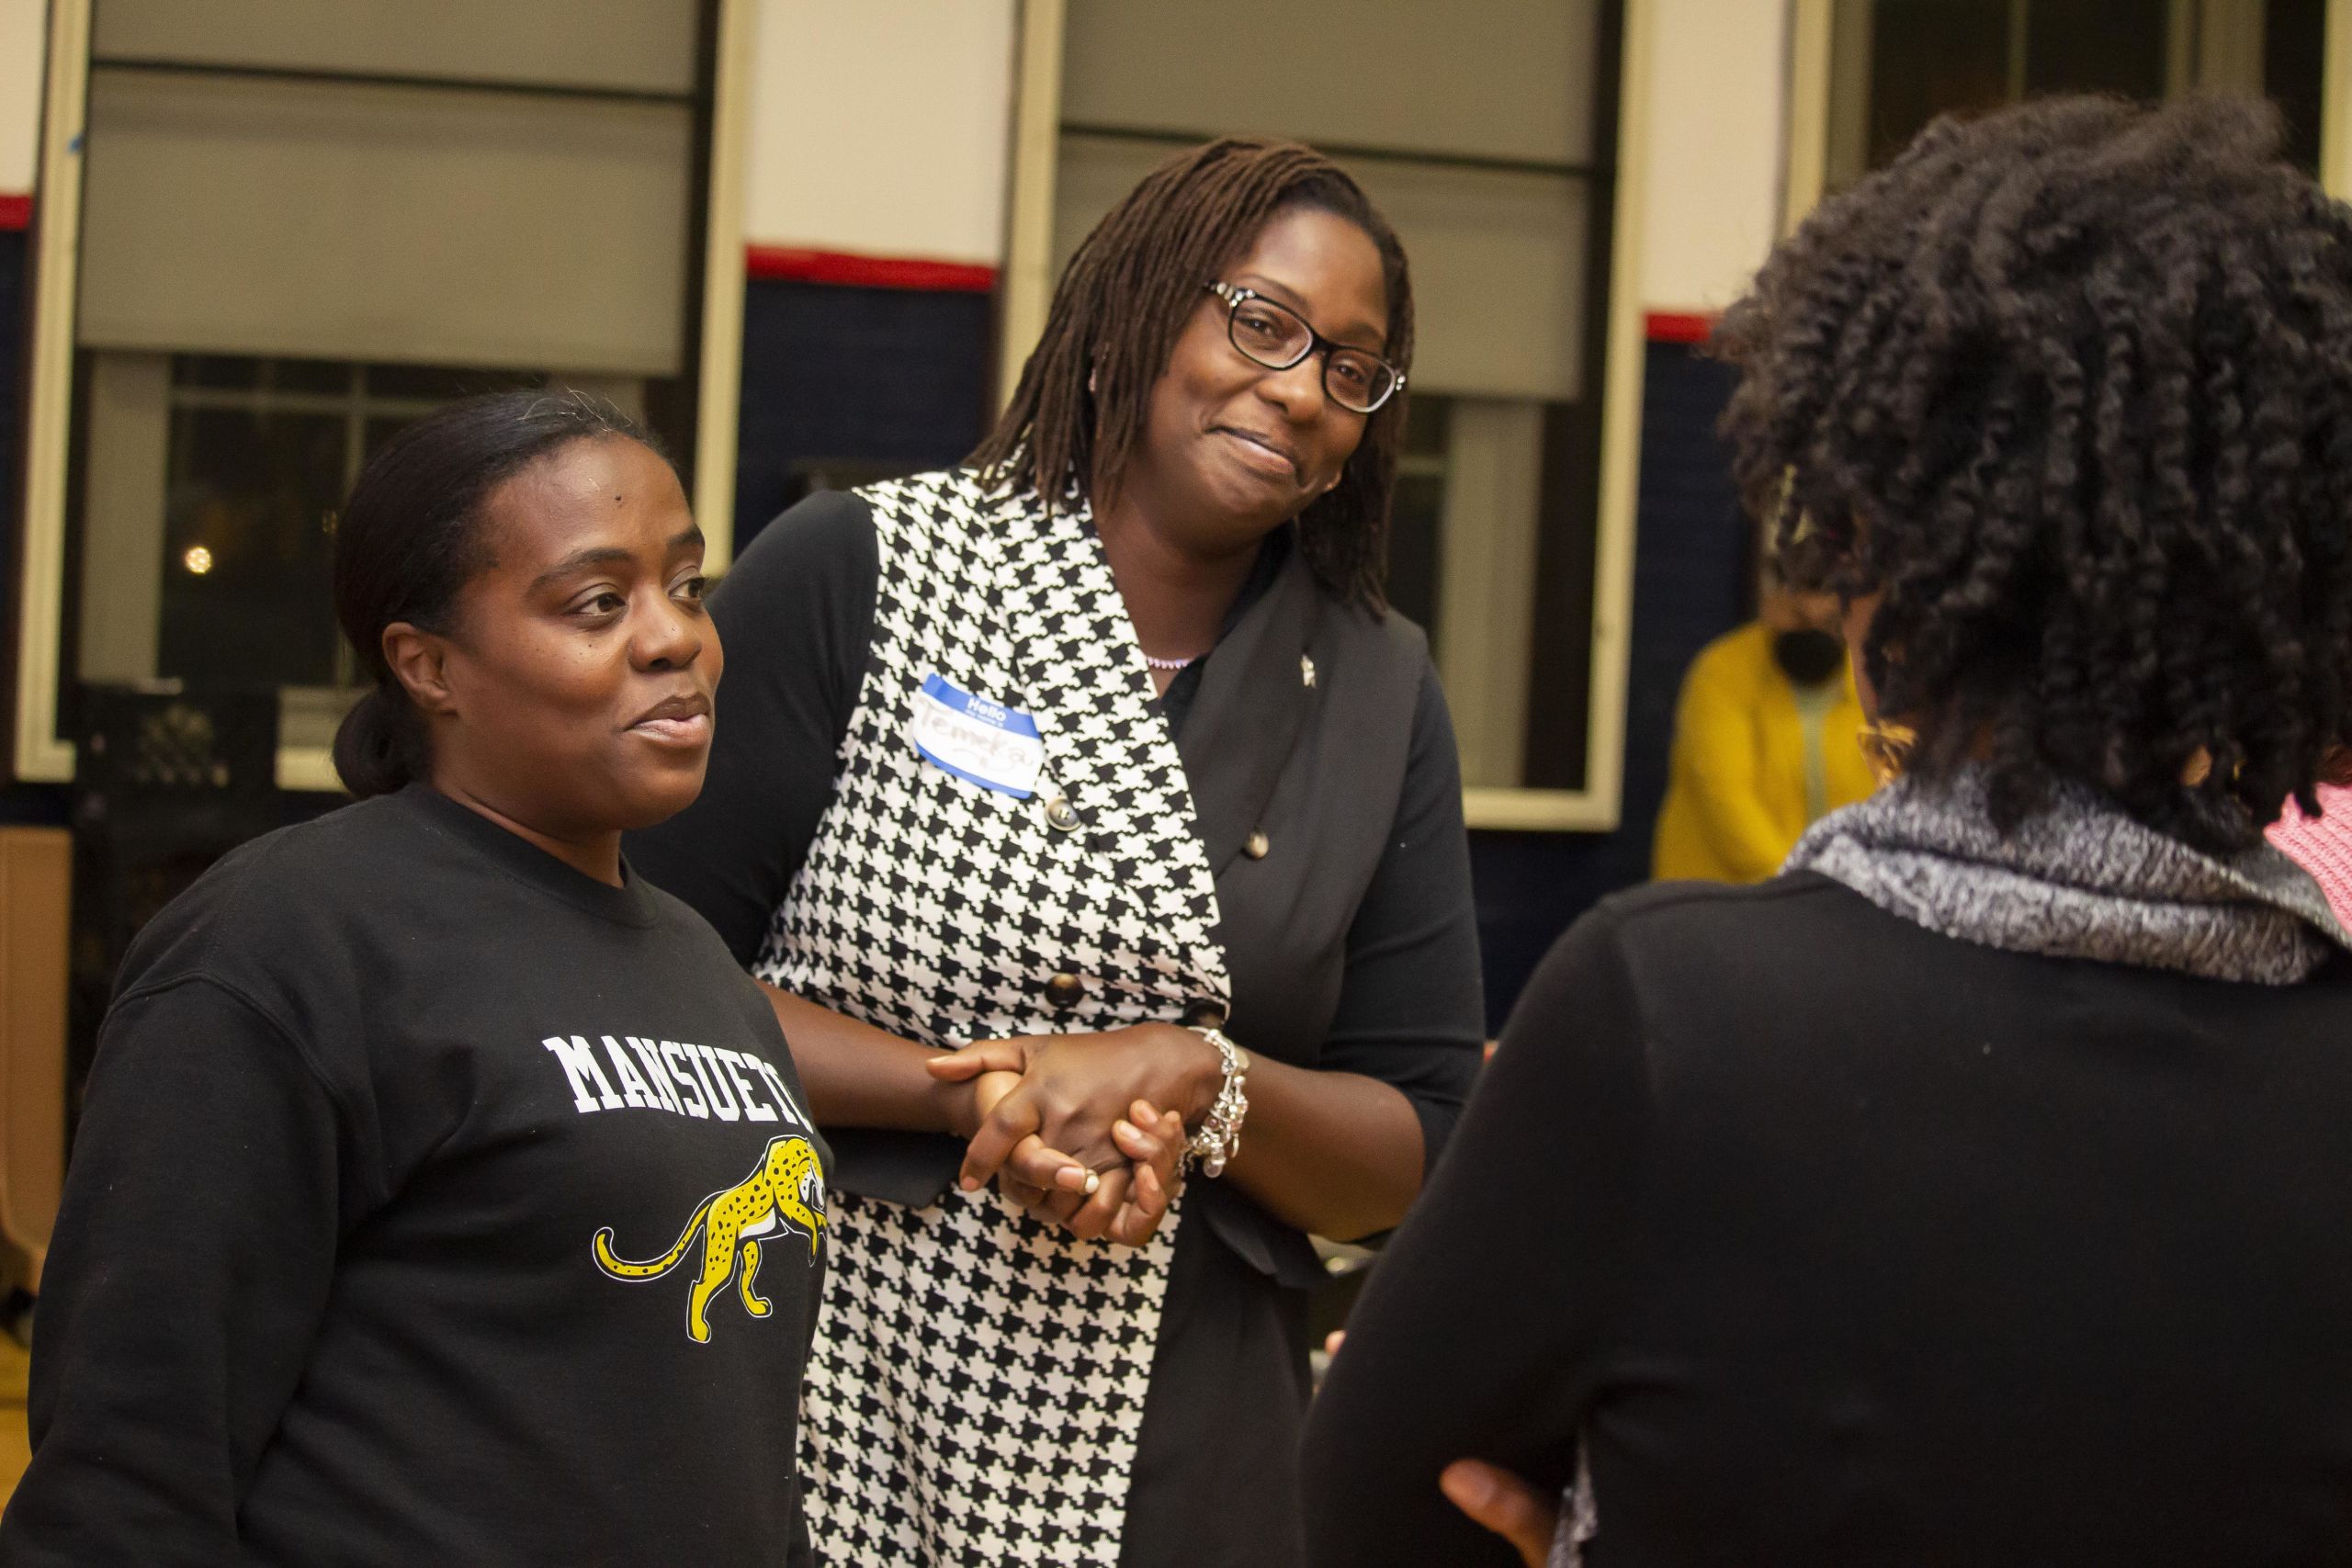 Photo shows two Noble Schools parents, Temeka Cartwright and Myisha Shields, talking with other parents and staff organizers at this year's first Parent Leadership Series meeting for all Noble schools in Chicago,IL.